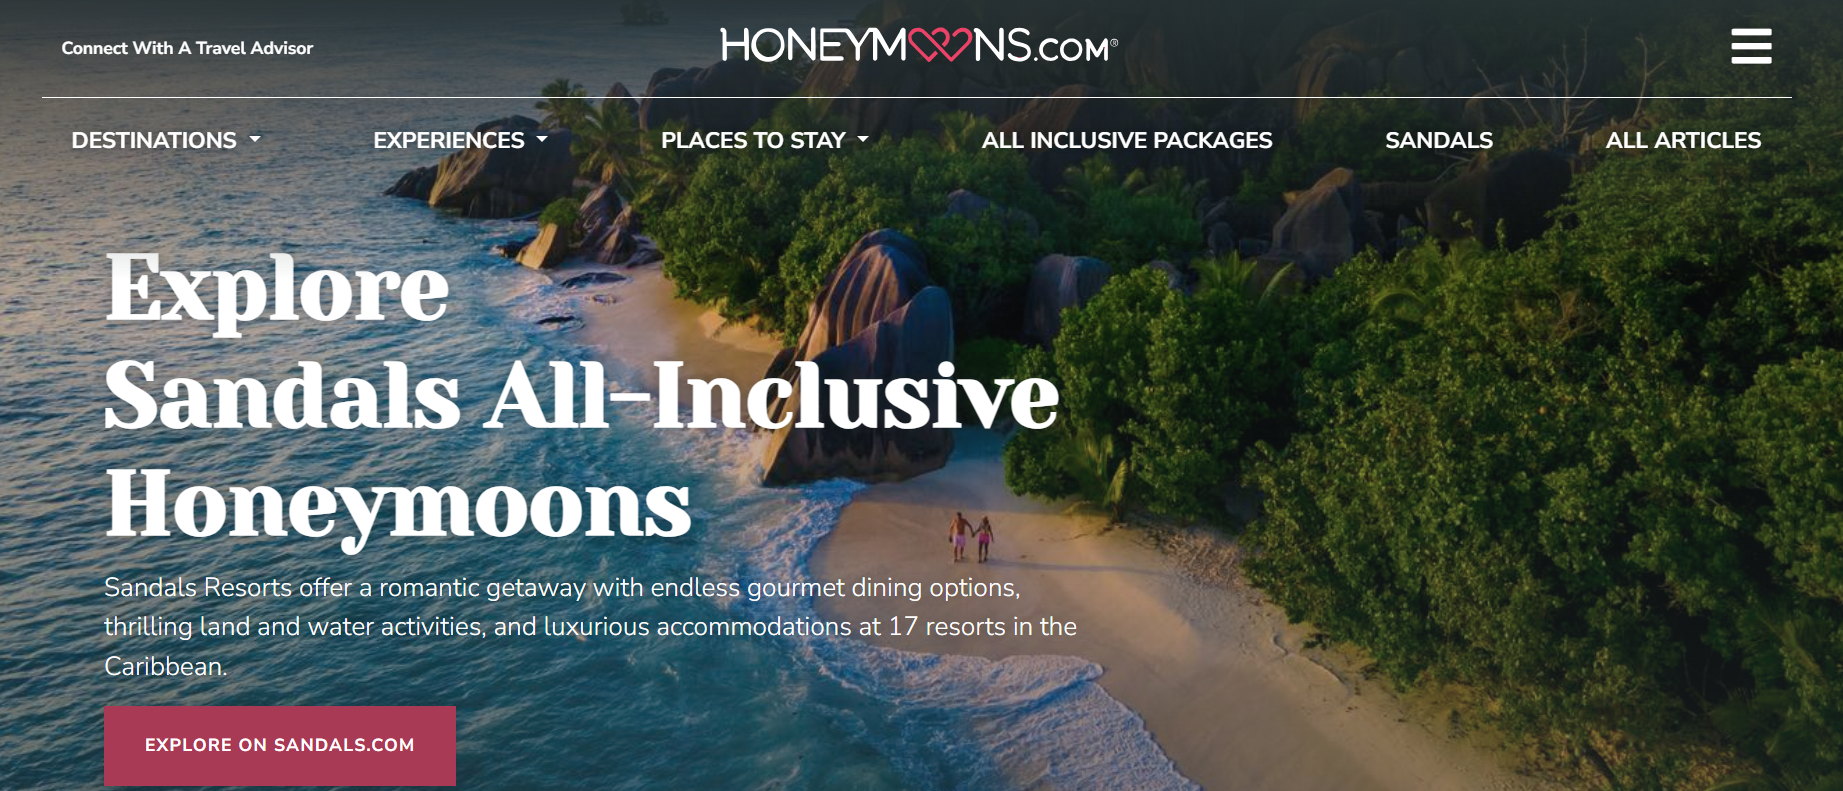 Jim Campbell, owner of Honeymoons.com, recently shared his business journey in an Entrepreneur.com article, highlighting the transformative effect of acquiring a premium domain name. 